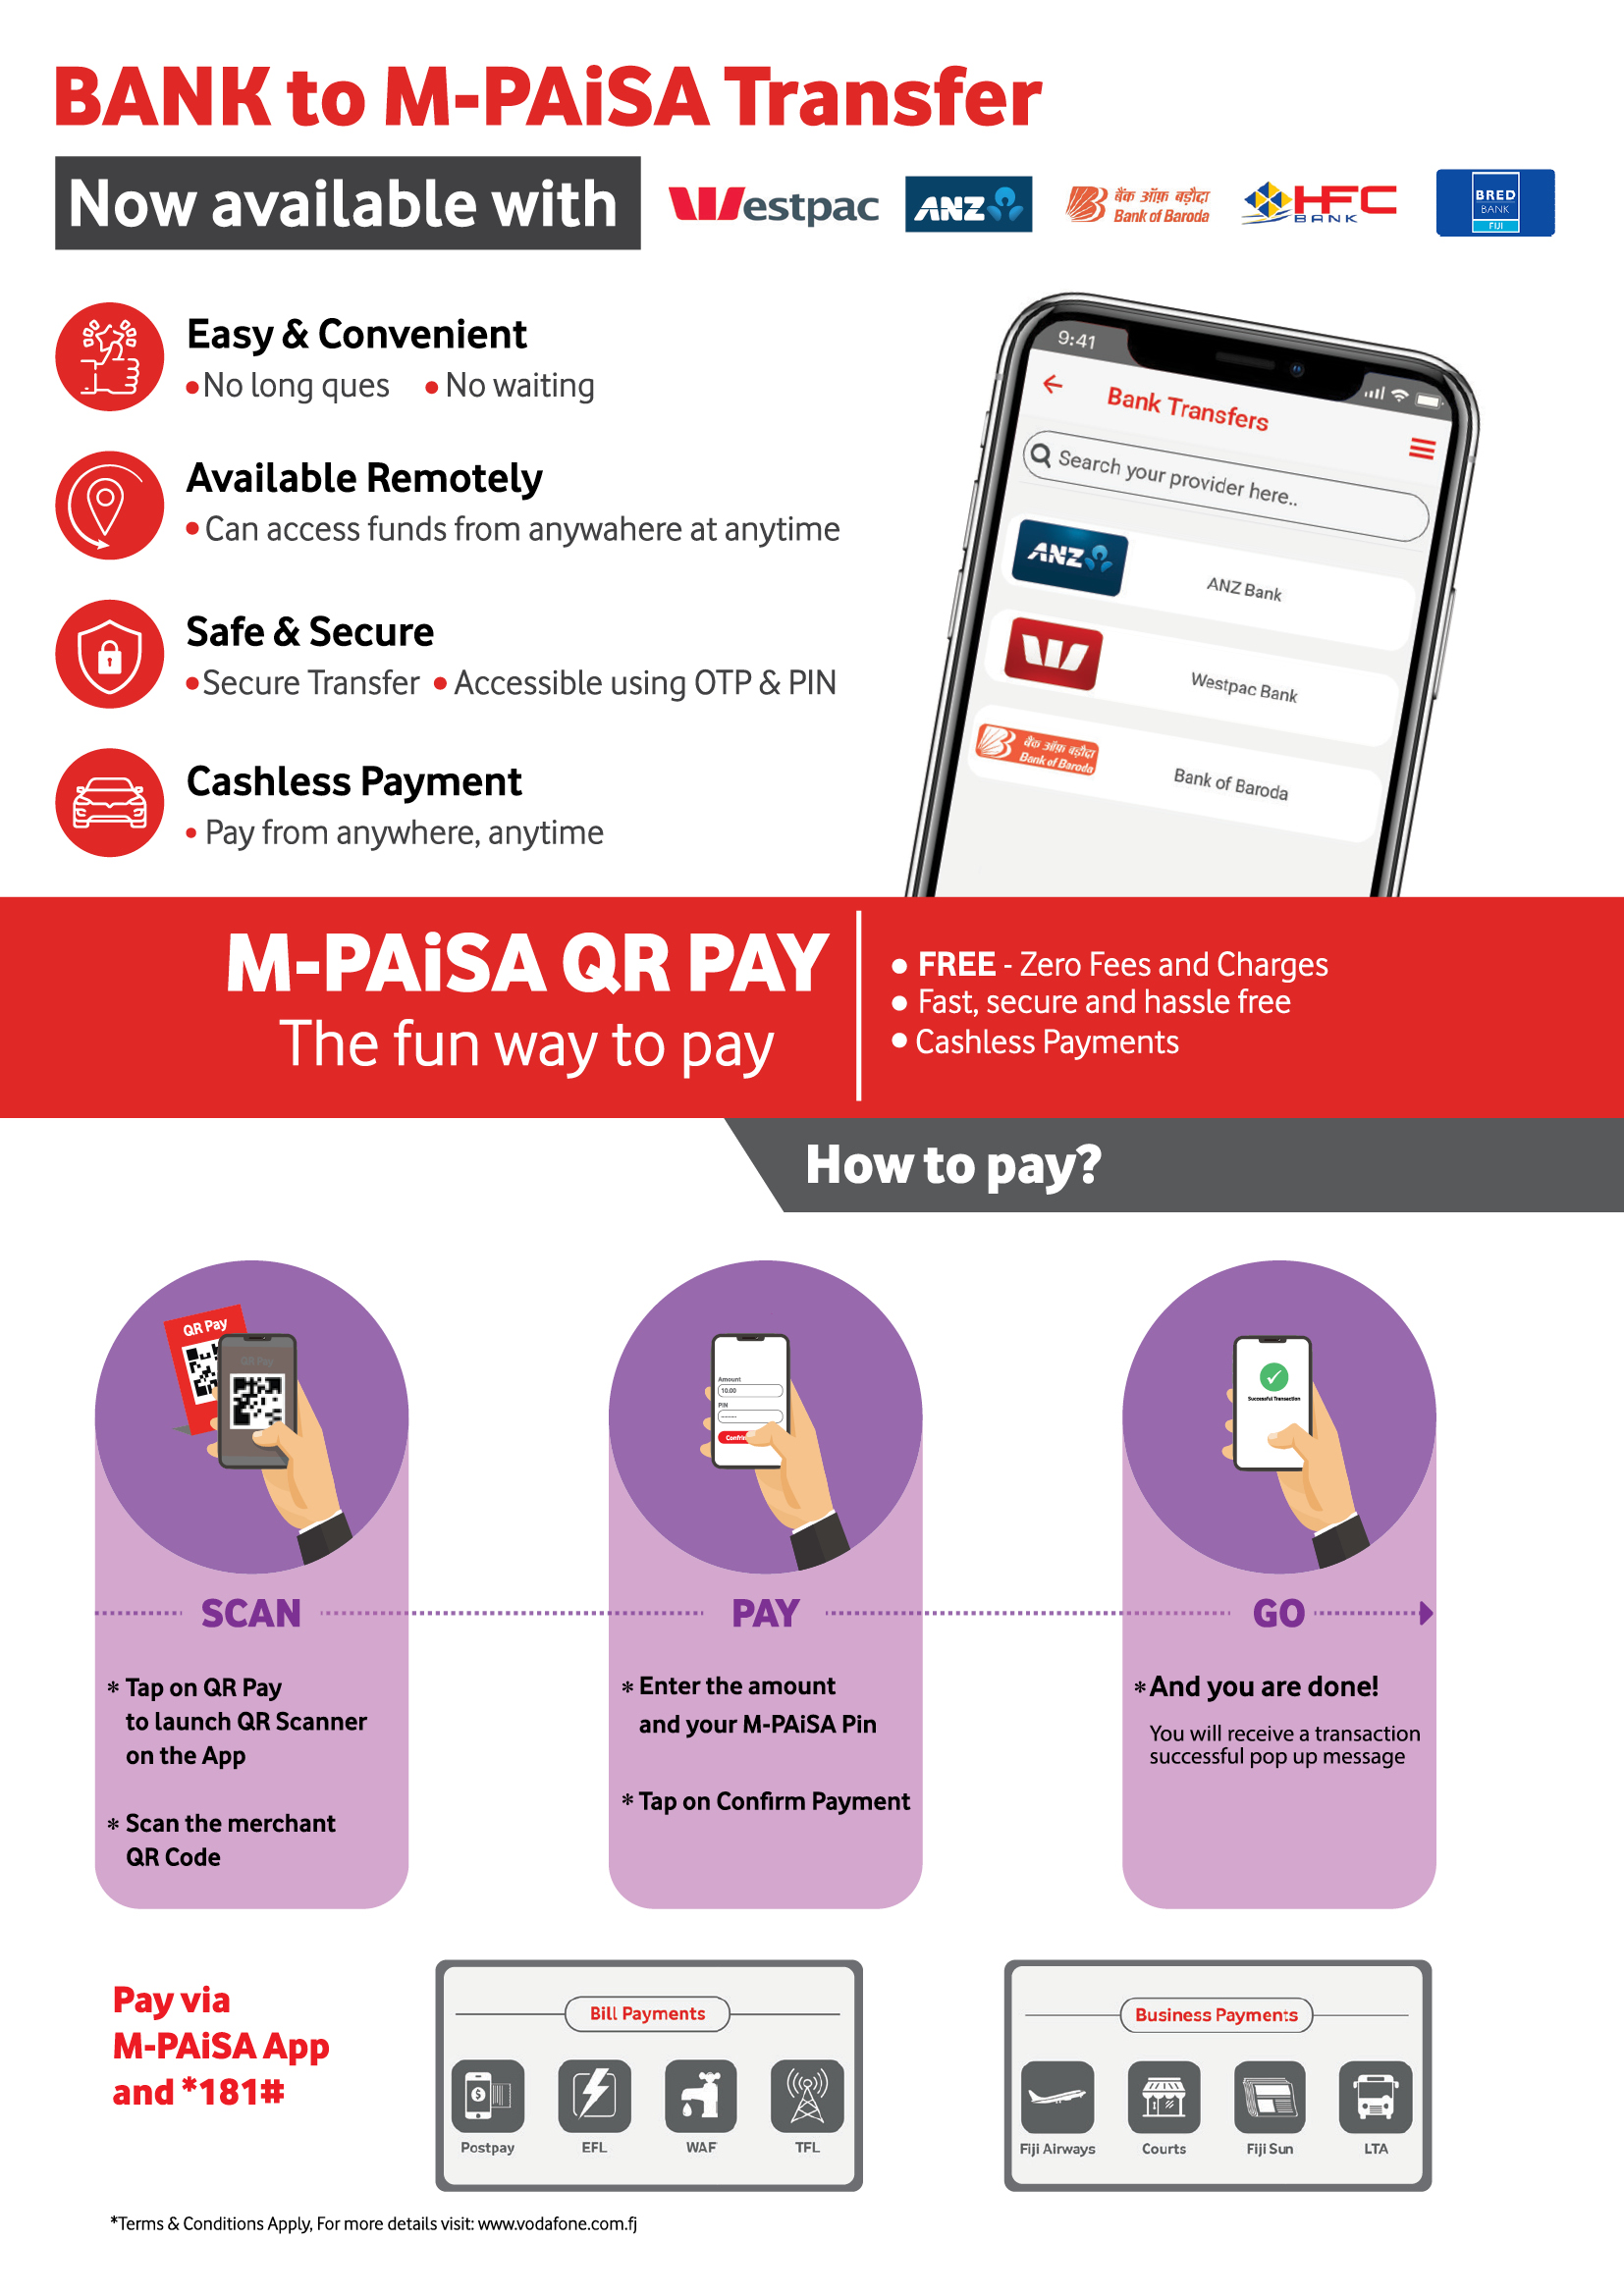 3. Bank to M-PAiSA Transfer & QR Pay